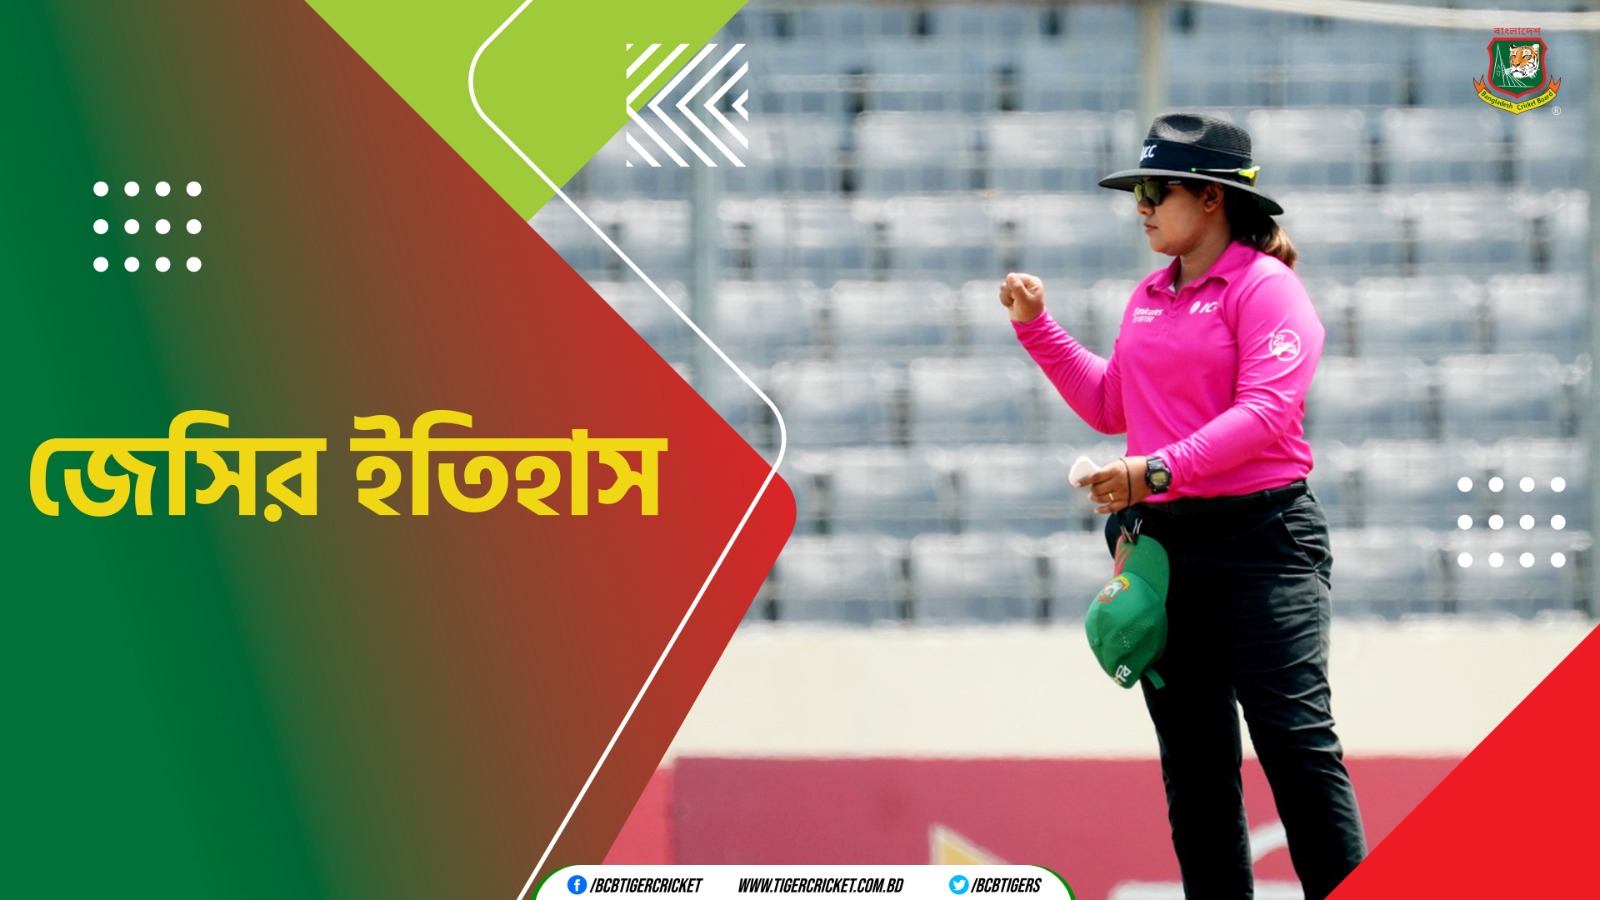 Jessy's debut as Bangladesh's First Female International Cricket Umpire was Historic